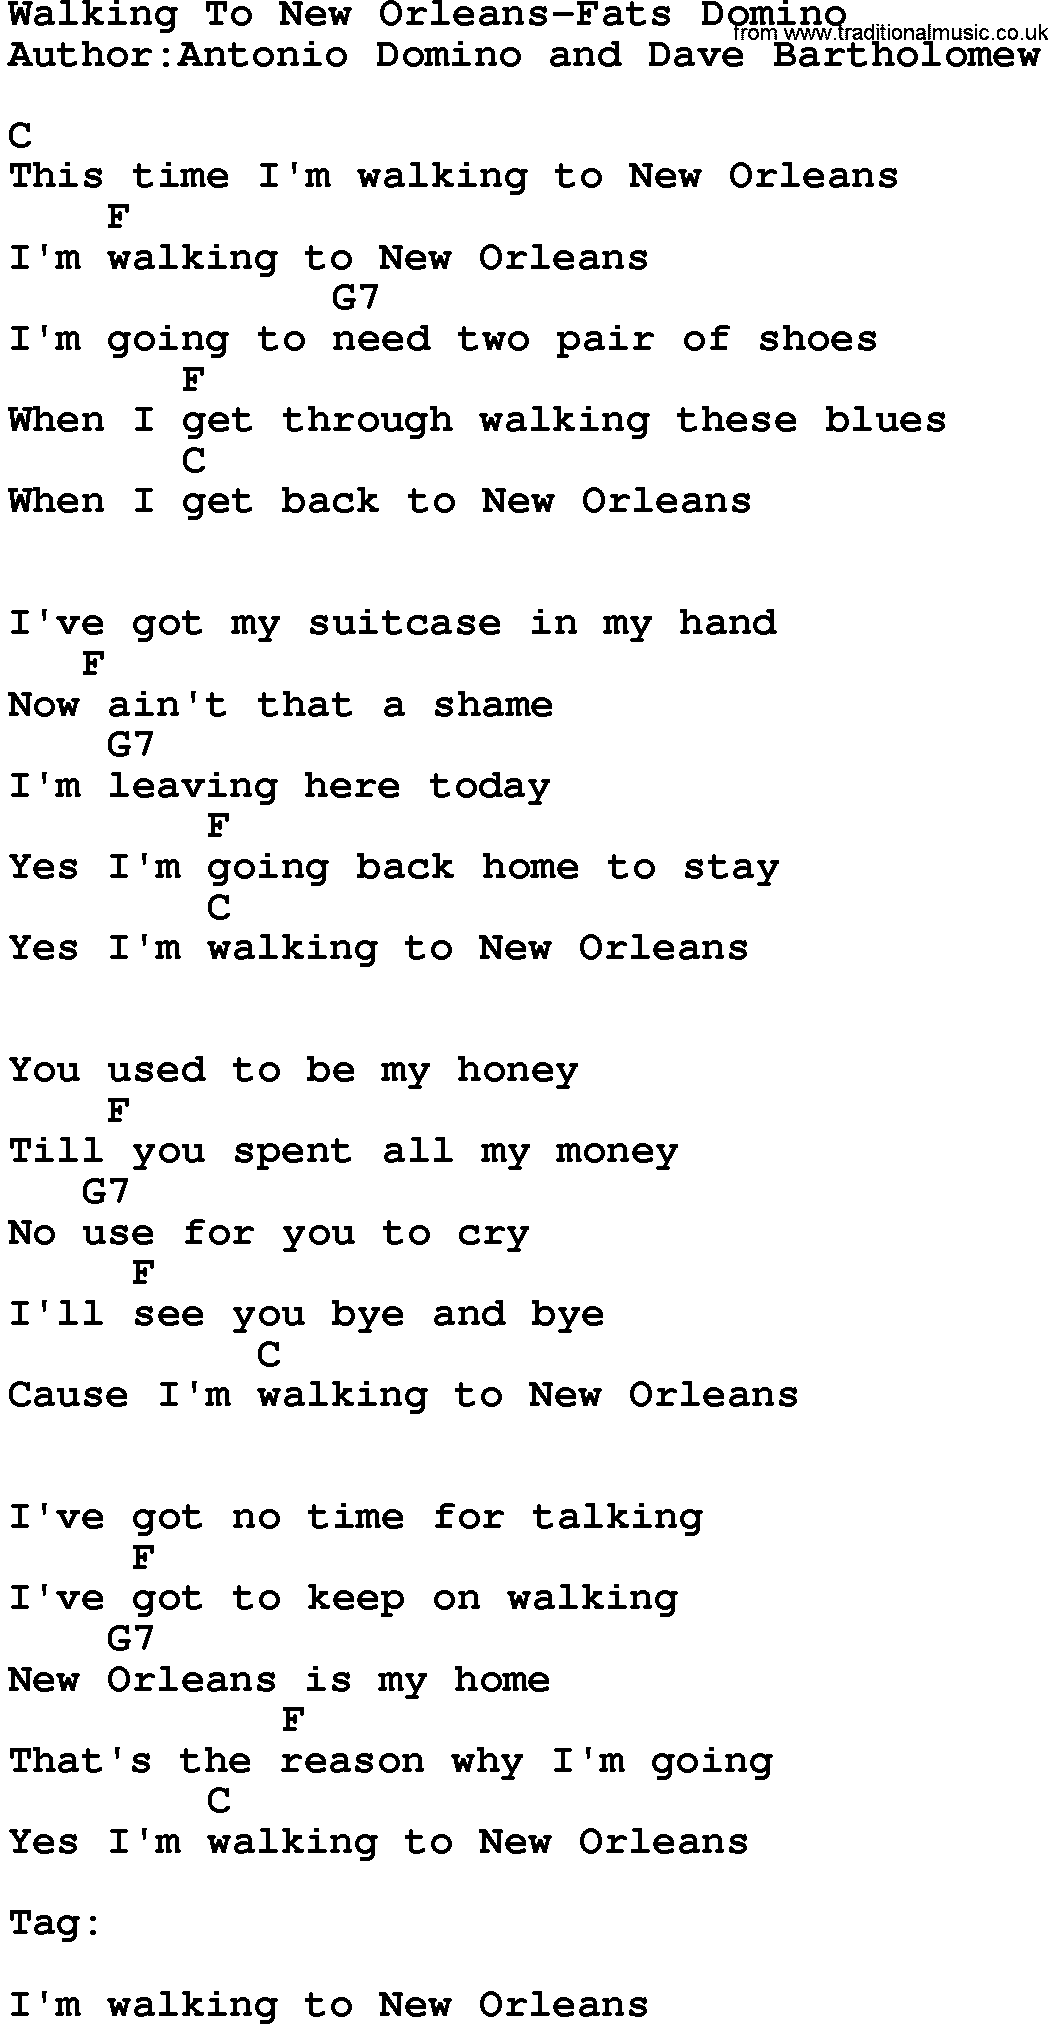 Country music song: Walking To New Orleans-Fats Domino lyrics and chords